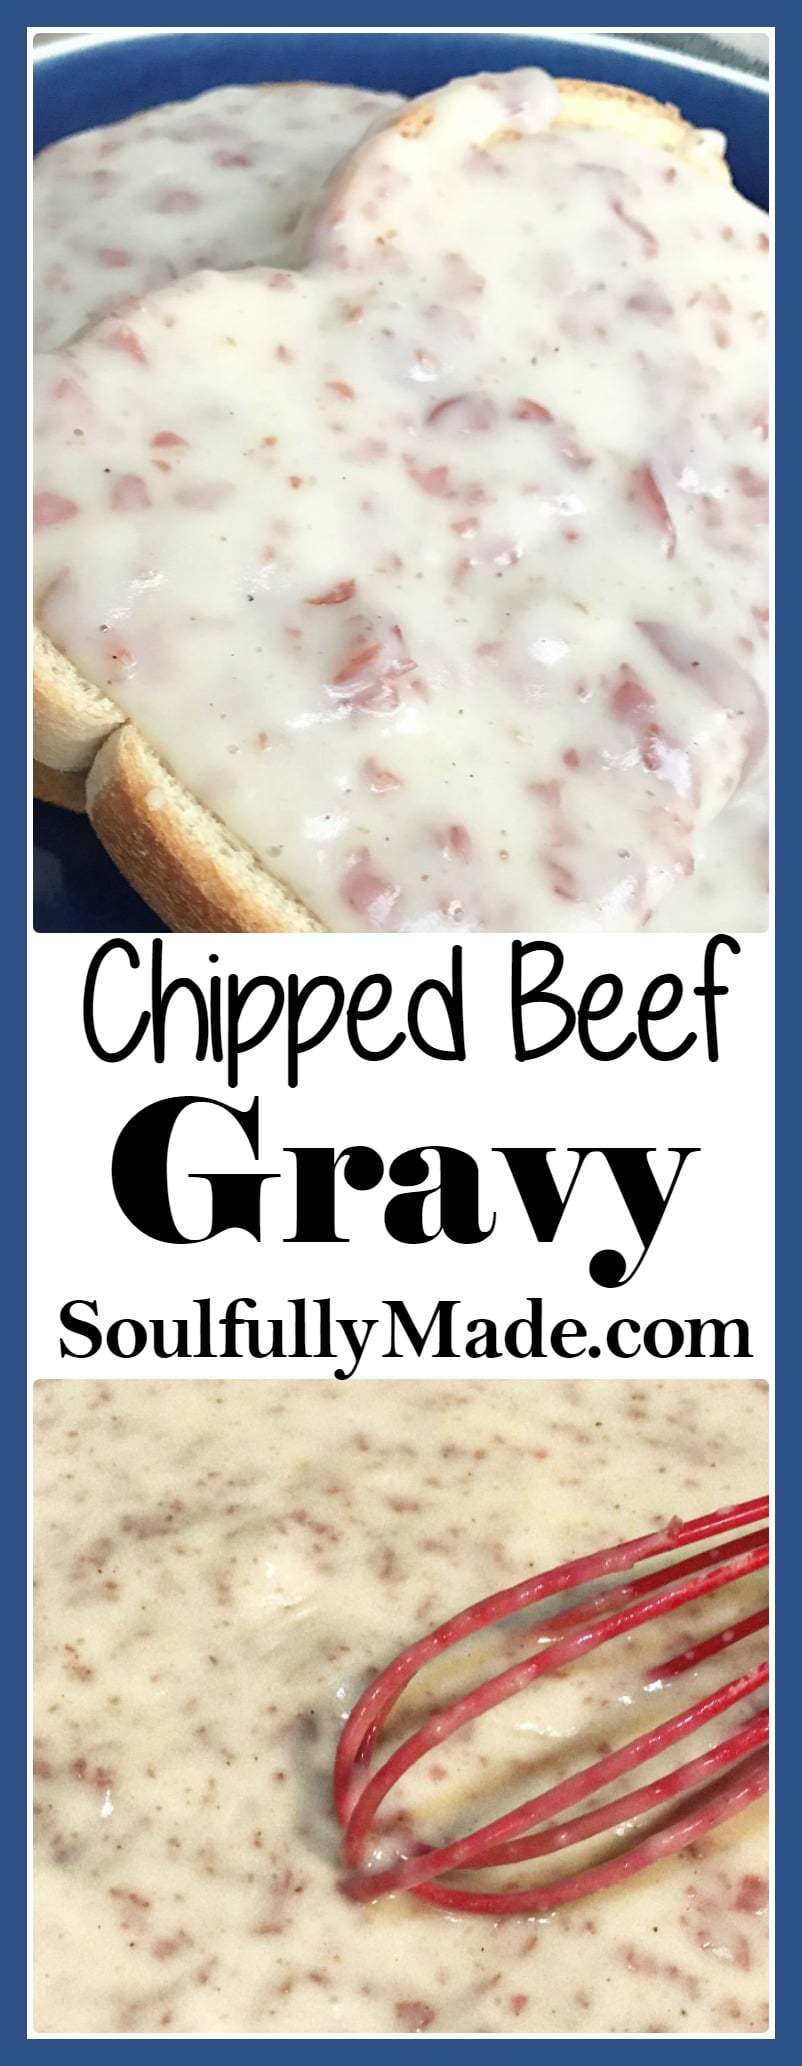 Creamed Chipped Beef Gravy - Soulfully Made